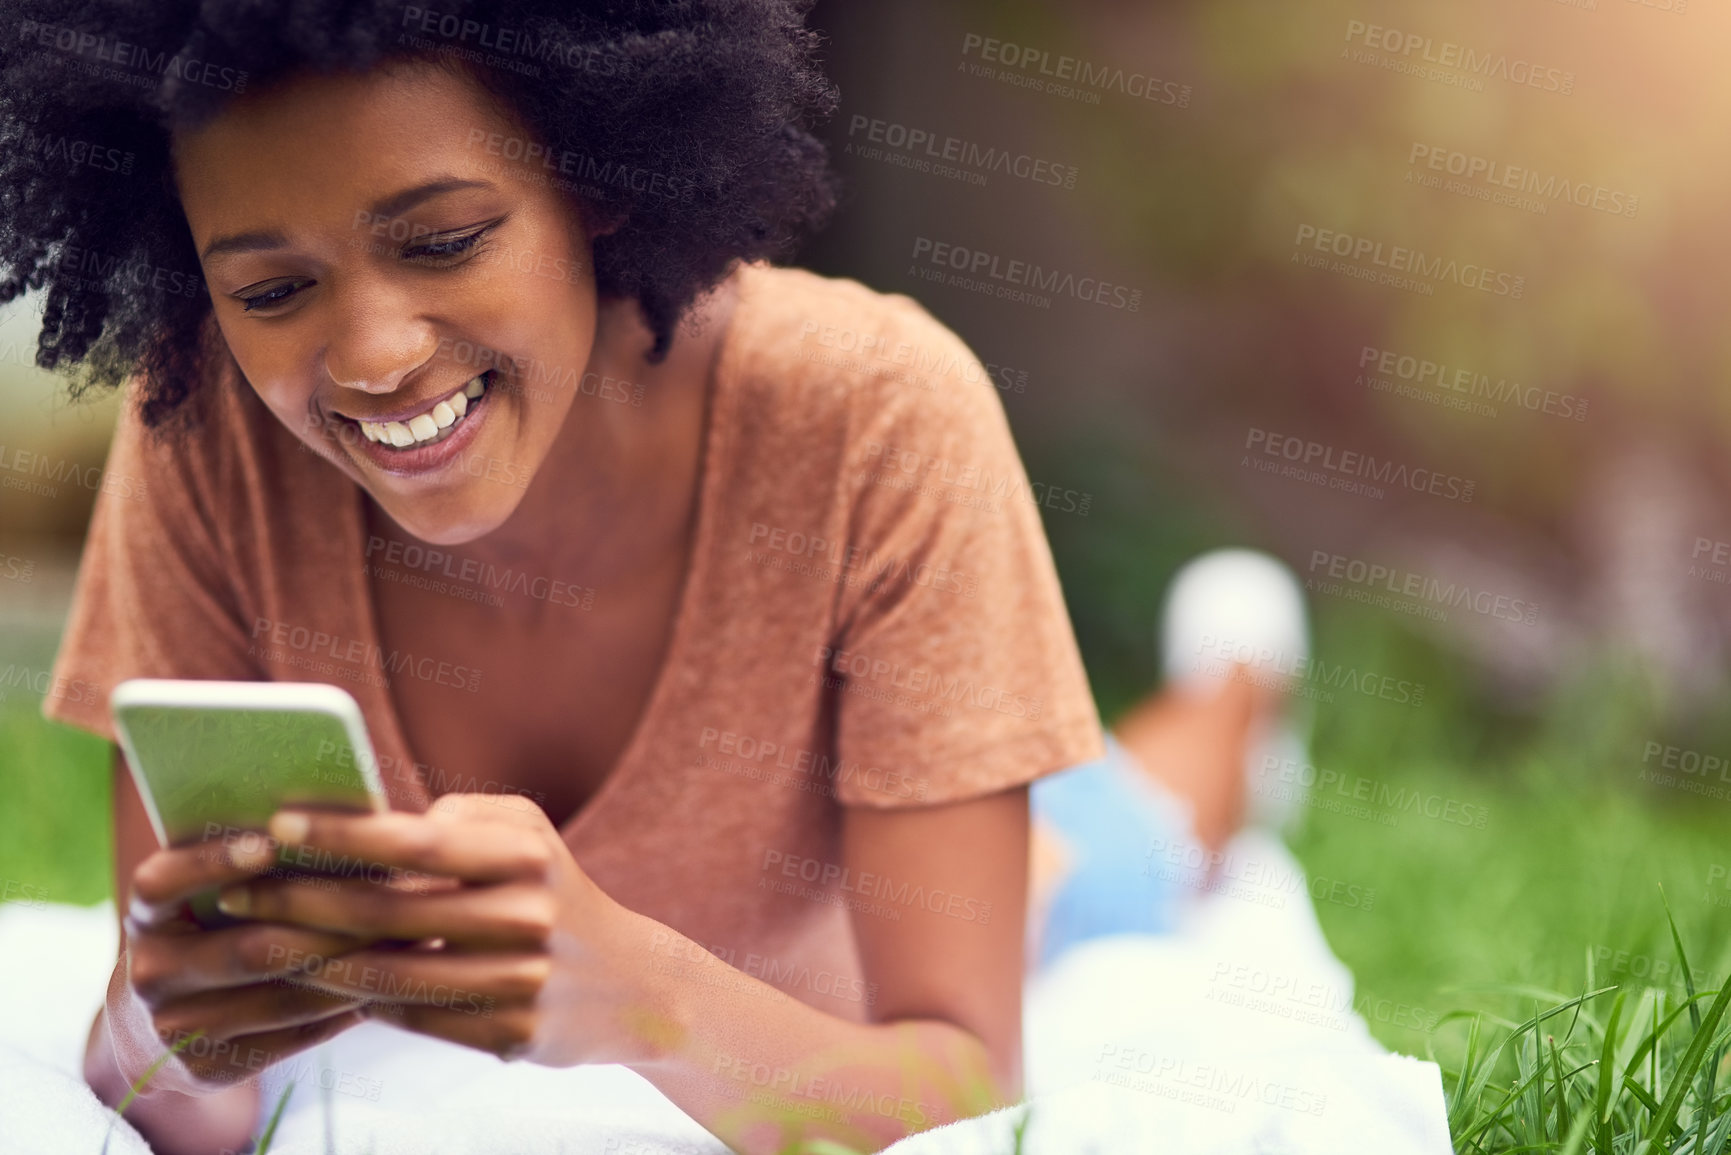 Buy stock photo Shot of a young man texting while relaxing at the park